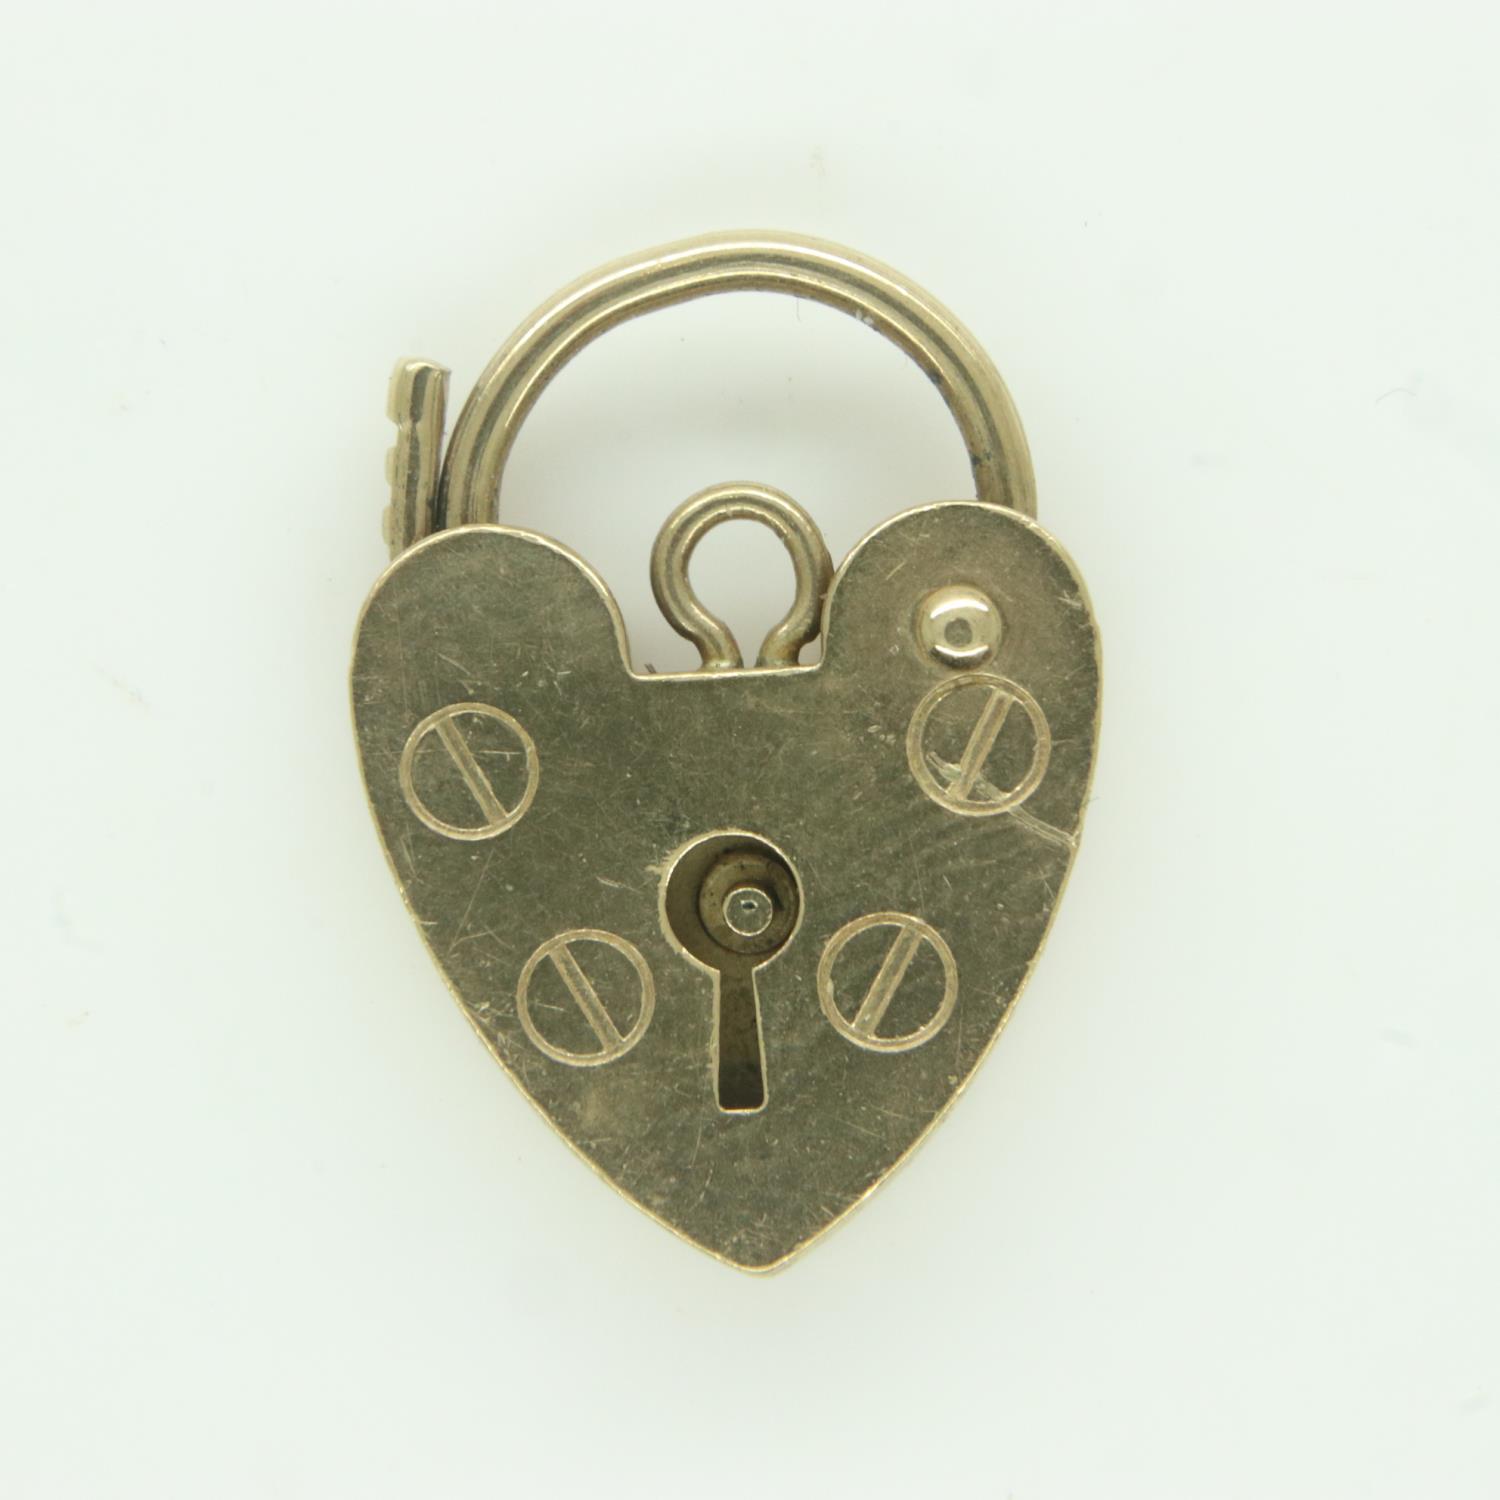 9ct gold padlock clasp, 1.6g. UK P&P Group 0 (£6+VAT for the first lot and £1+VAT for subsequent